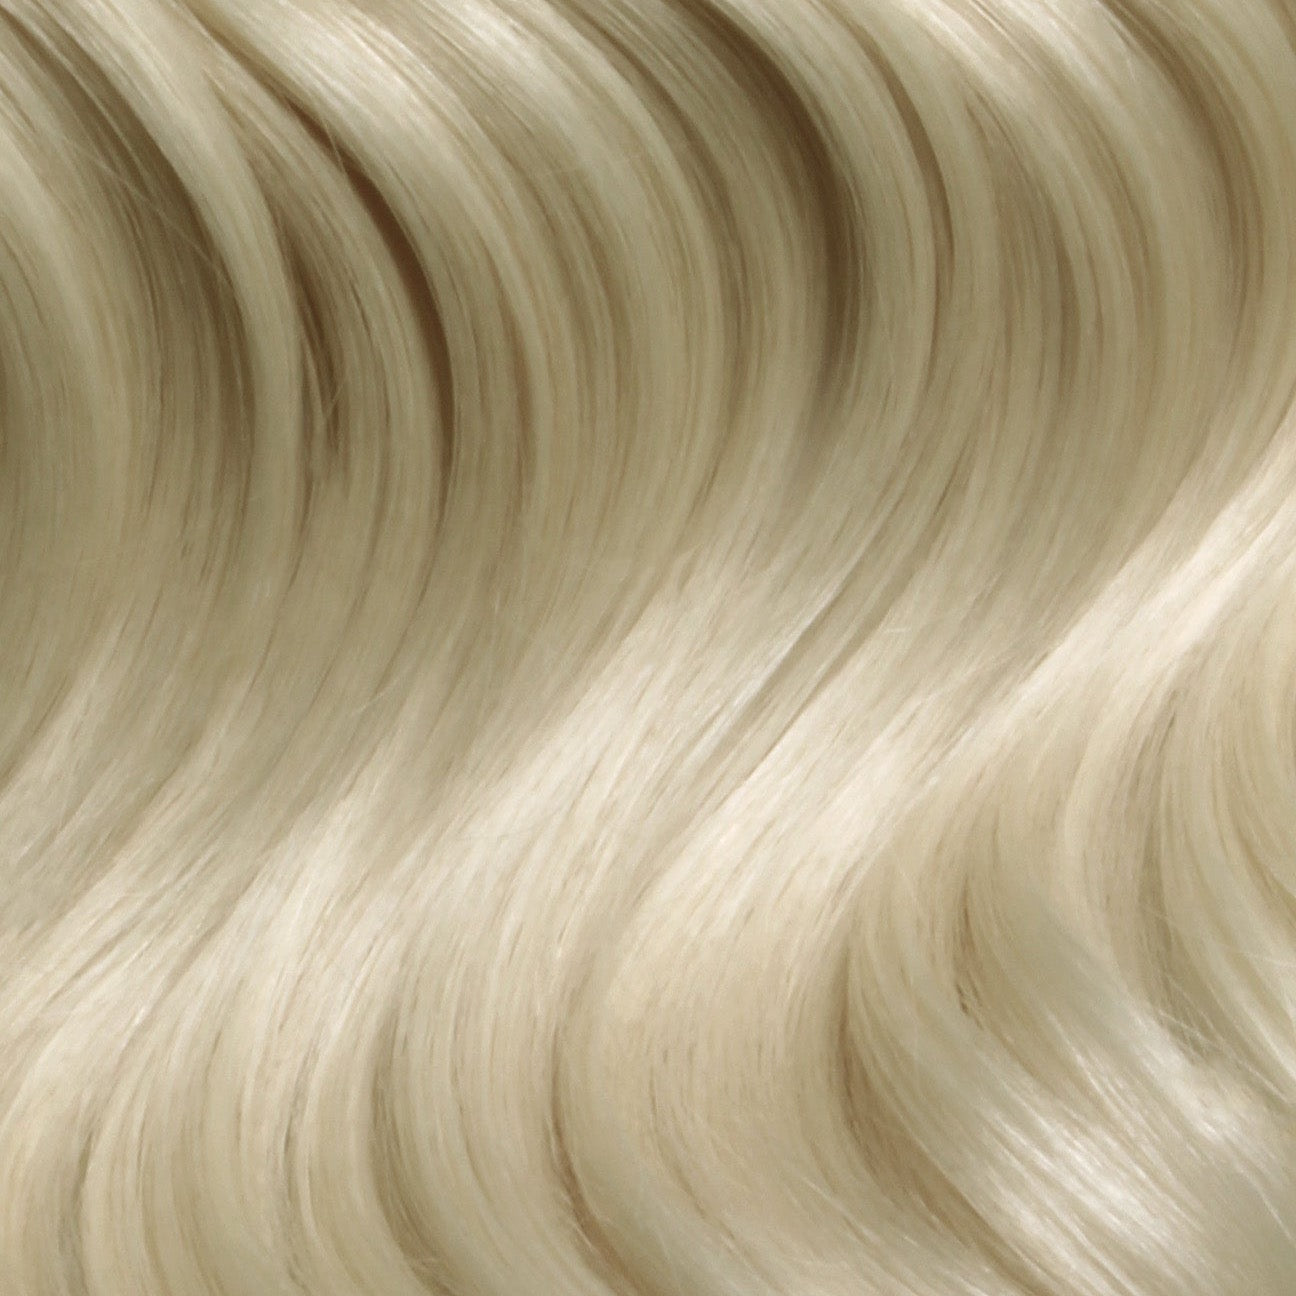 Nano Bonds 18 Inches - SWAY Hair Extensions Sandy-Blonde-60 Ultra-fine, invisible bonds for a flawless, natural look. 100% Remy Human hair, lightweight and versatile. Reusable and perfect for individual or salon use.